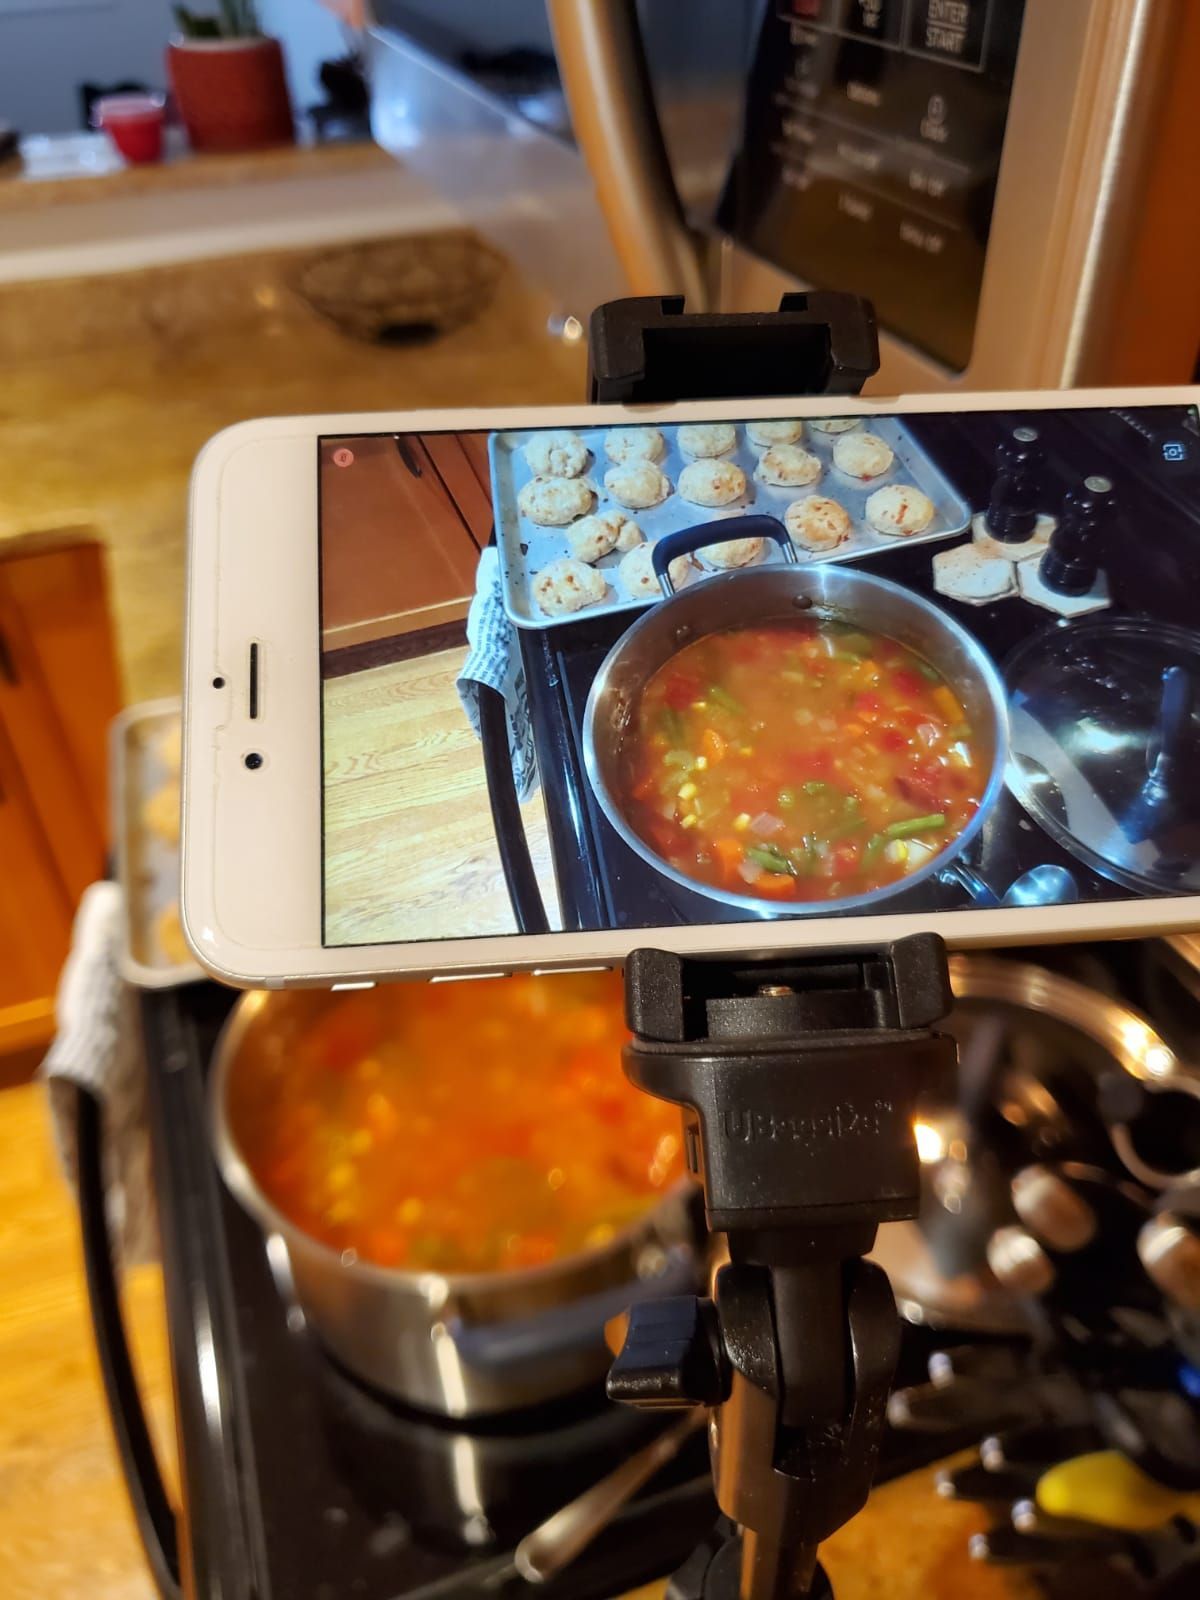 Gallery Photo of Virtual cooking class set-up. Join me from the comfort of your own kitchen!